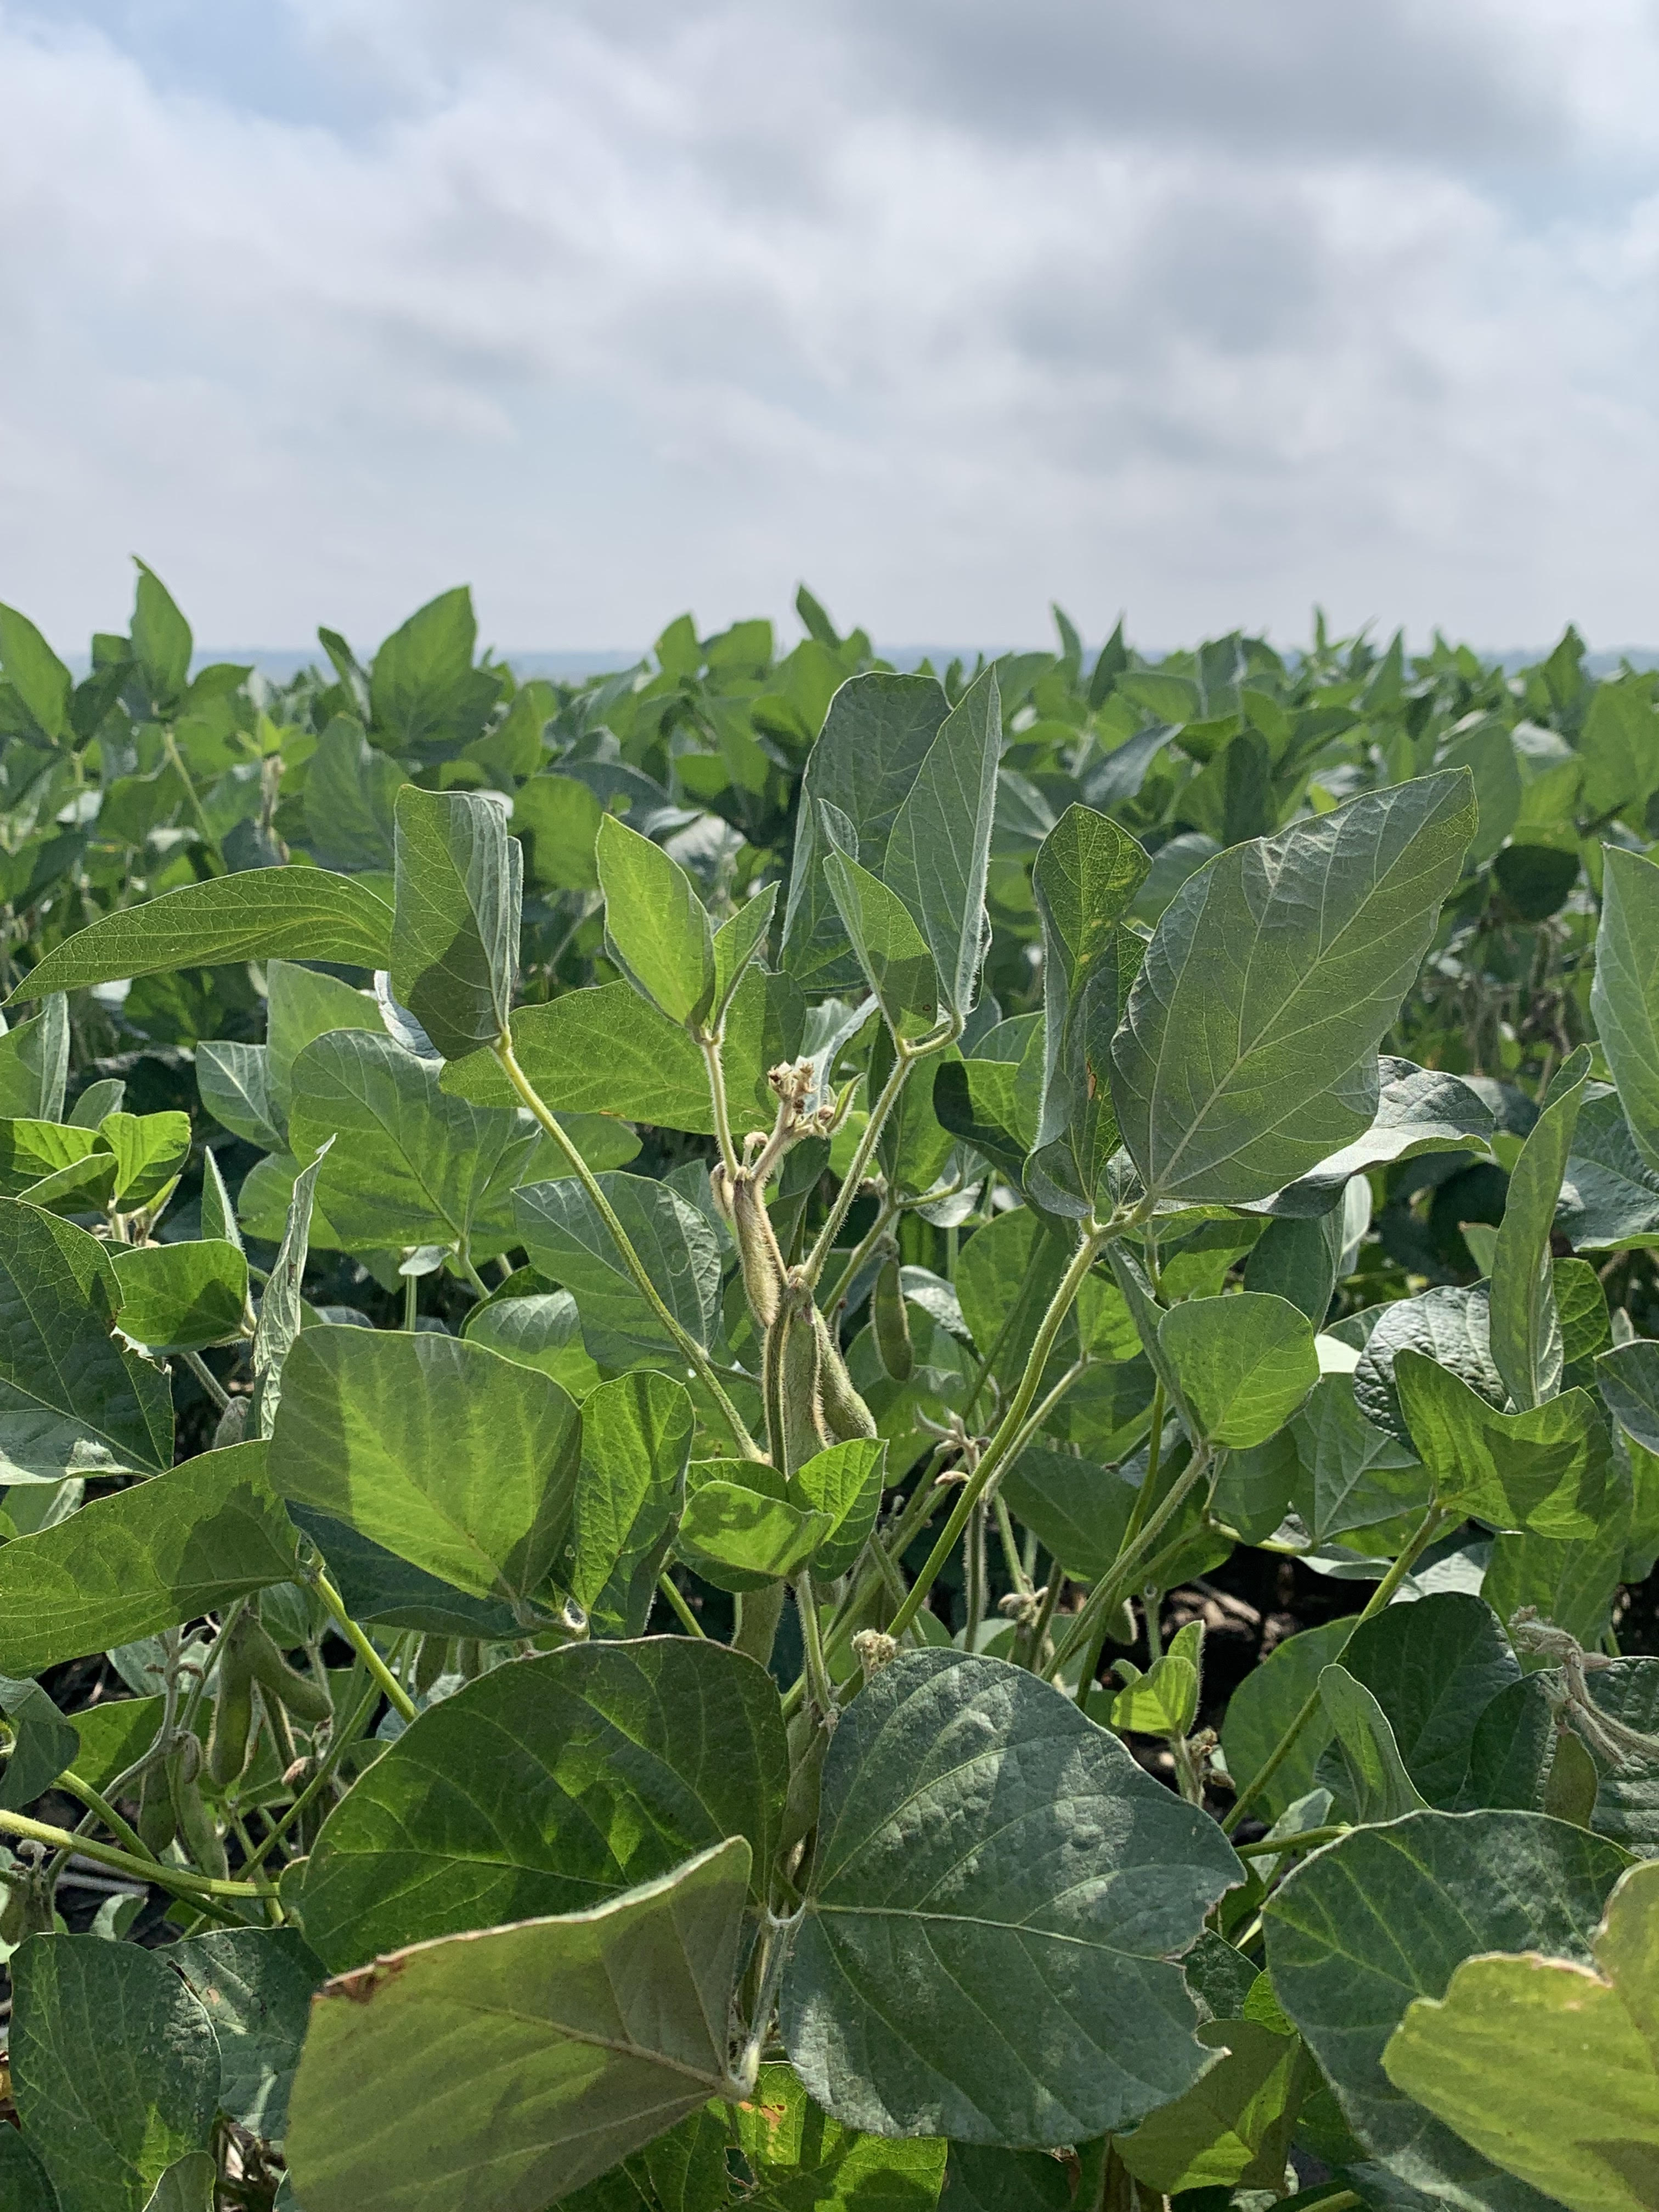 Mid-morning Ag News, February 24, 2022: Finding new uses for U.S. soy